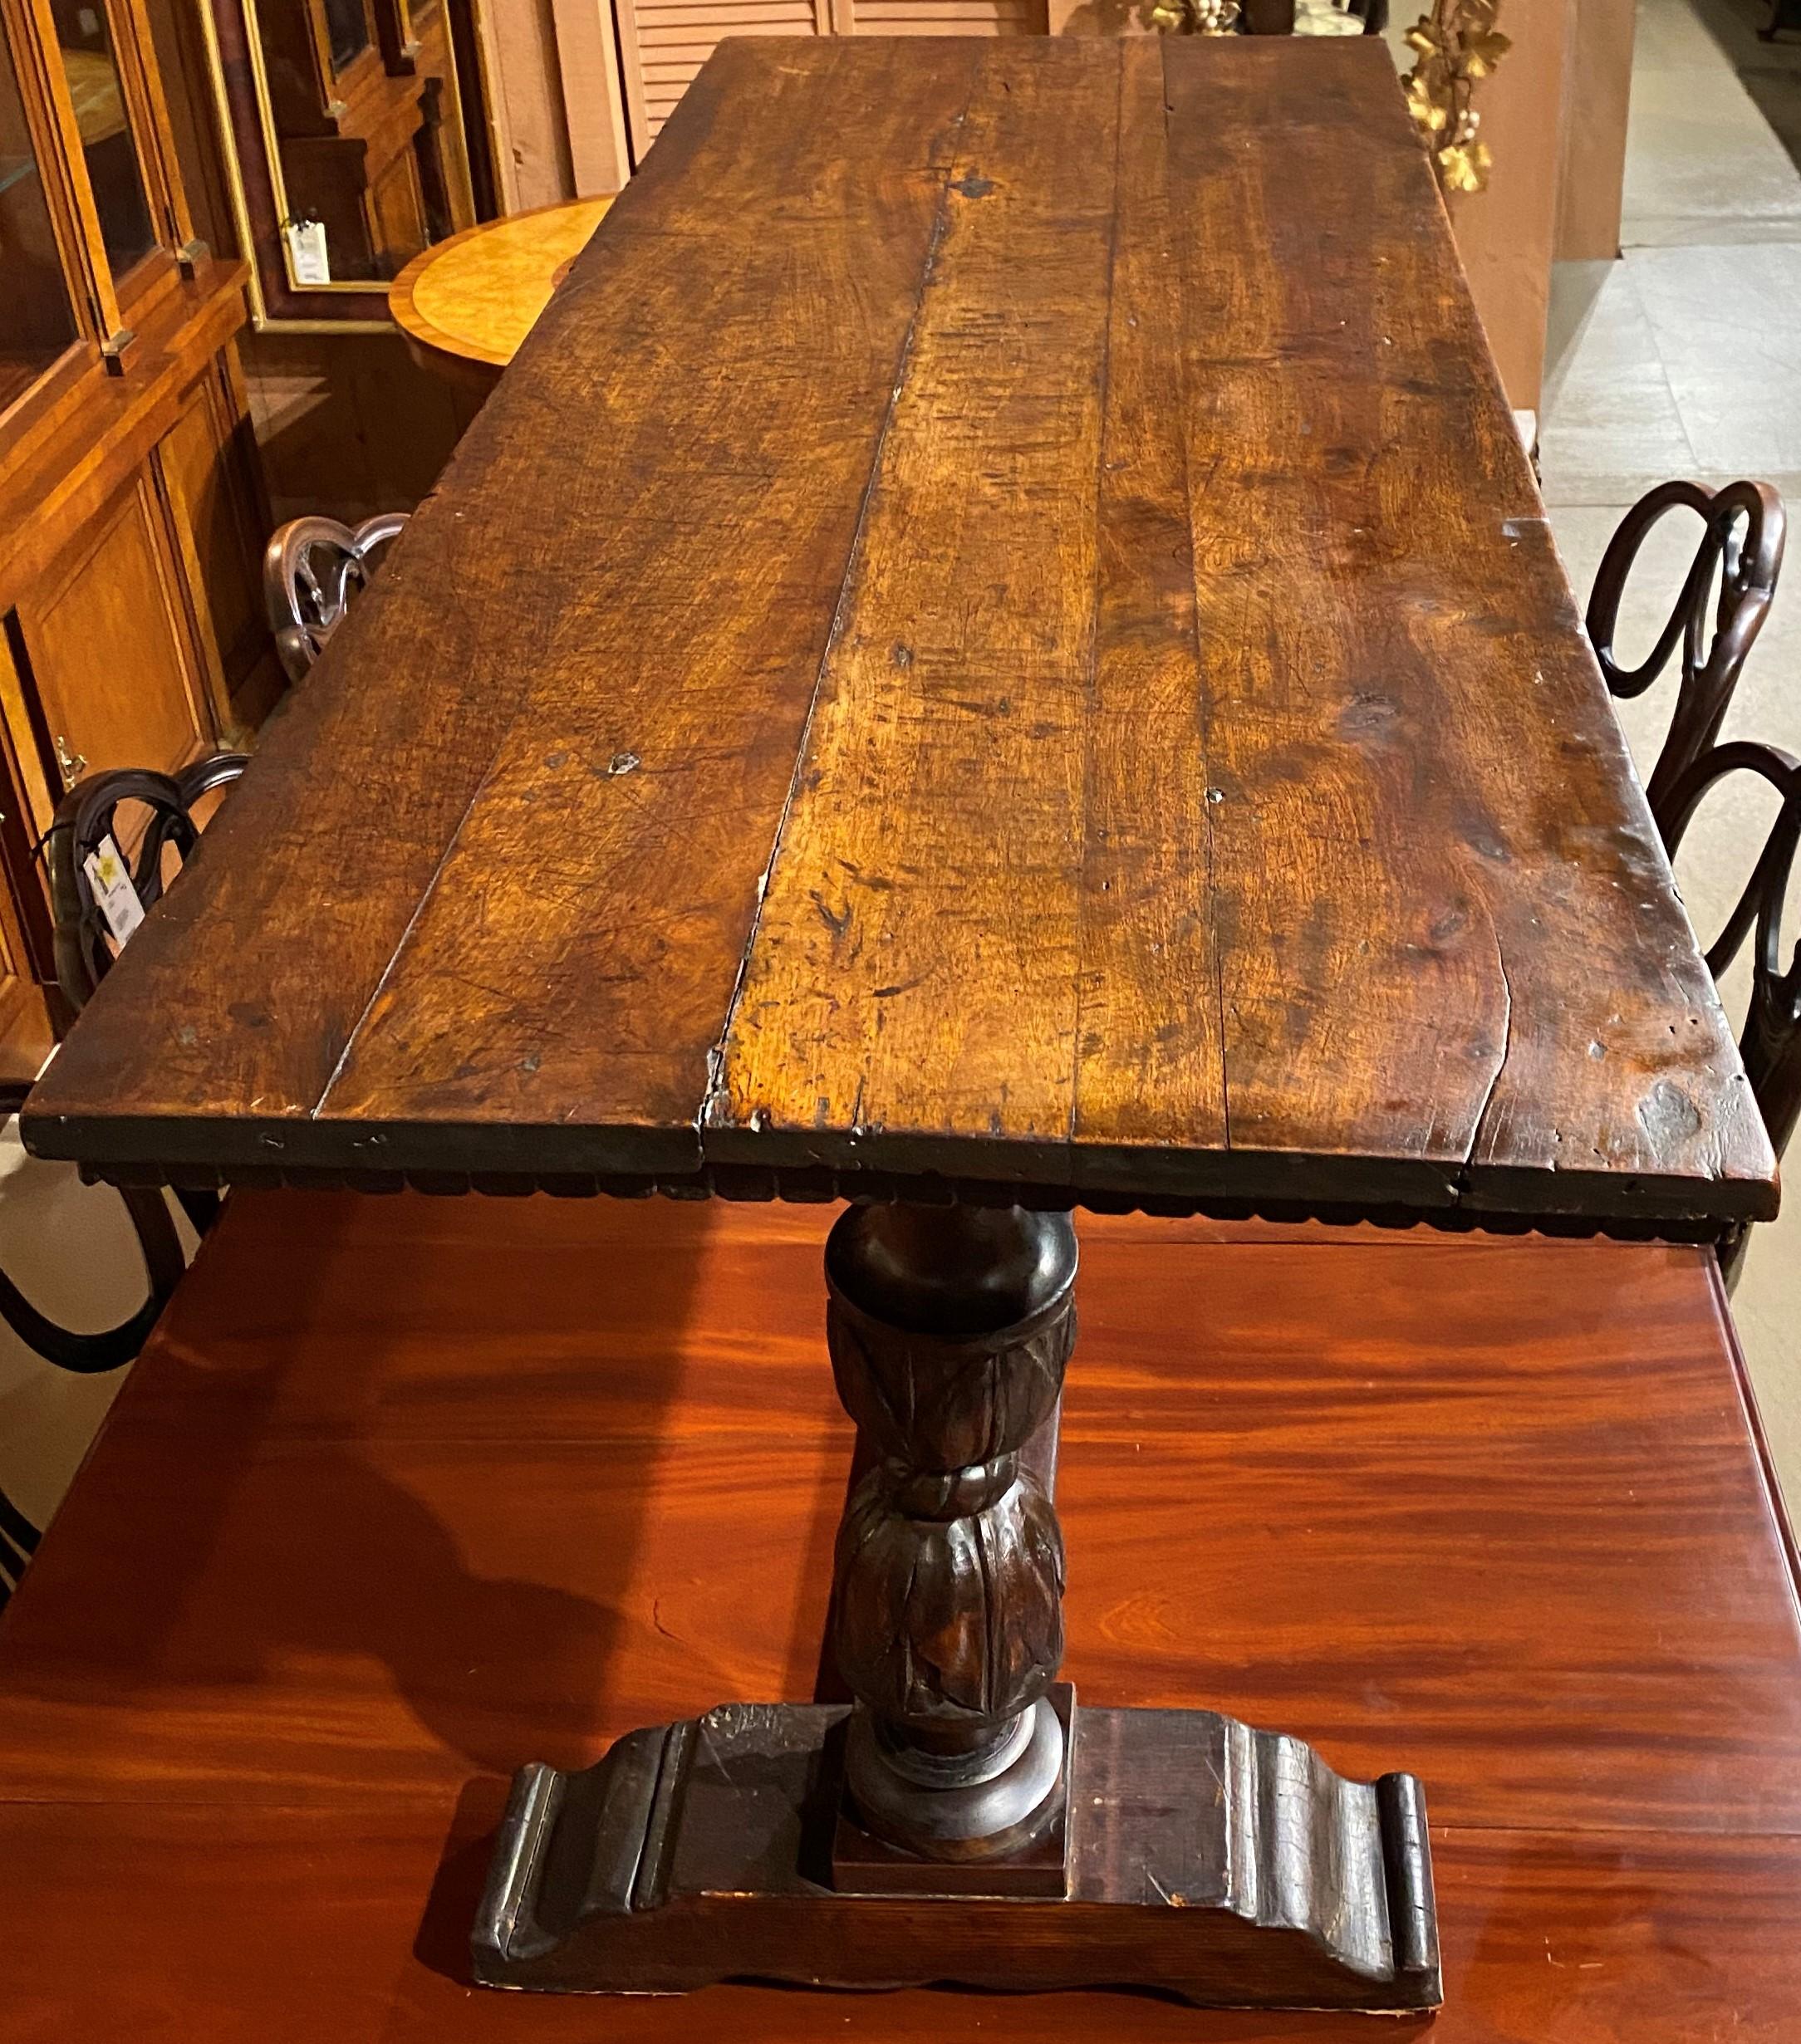 A fine English rectangular walnut refectory table made from 18th and 19th century components, including a molded carved edge top, a double pedestal carved base, supported with shoe feet and central single base stretcher. The table is in very good